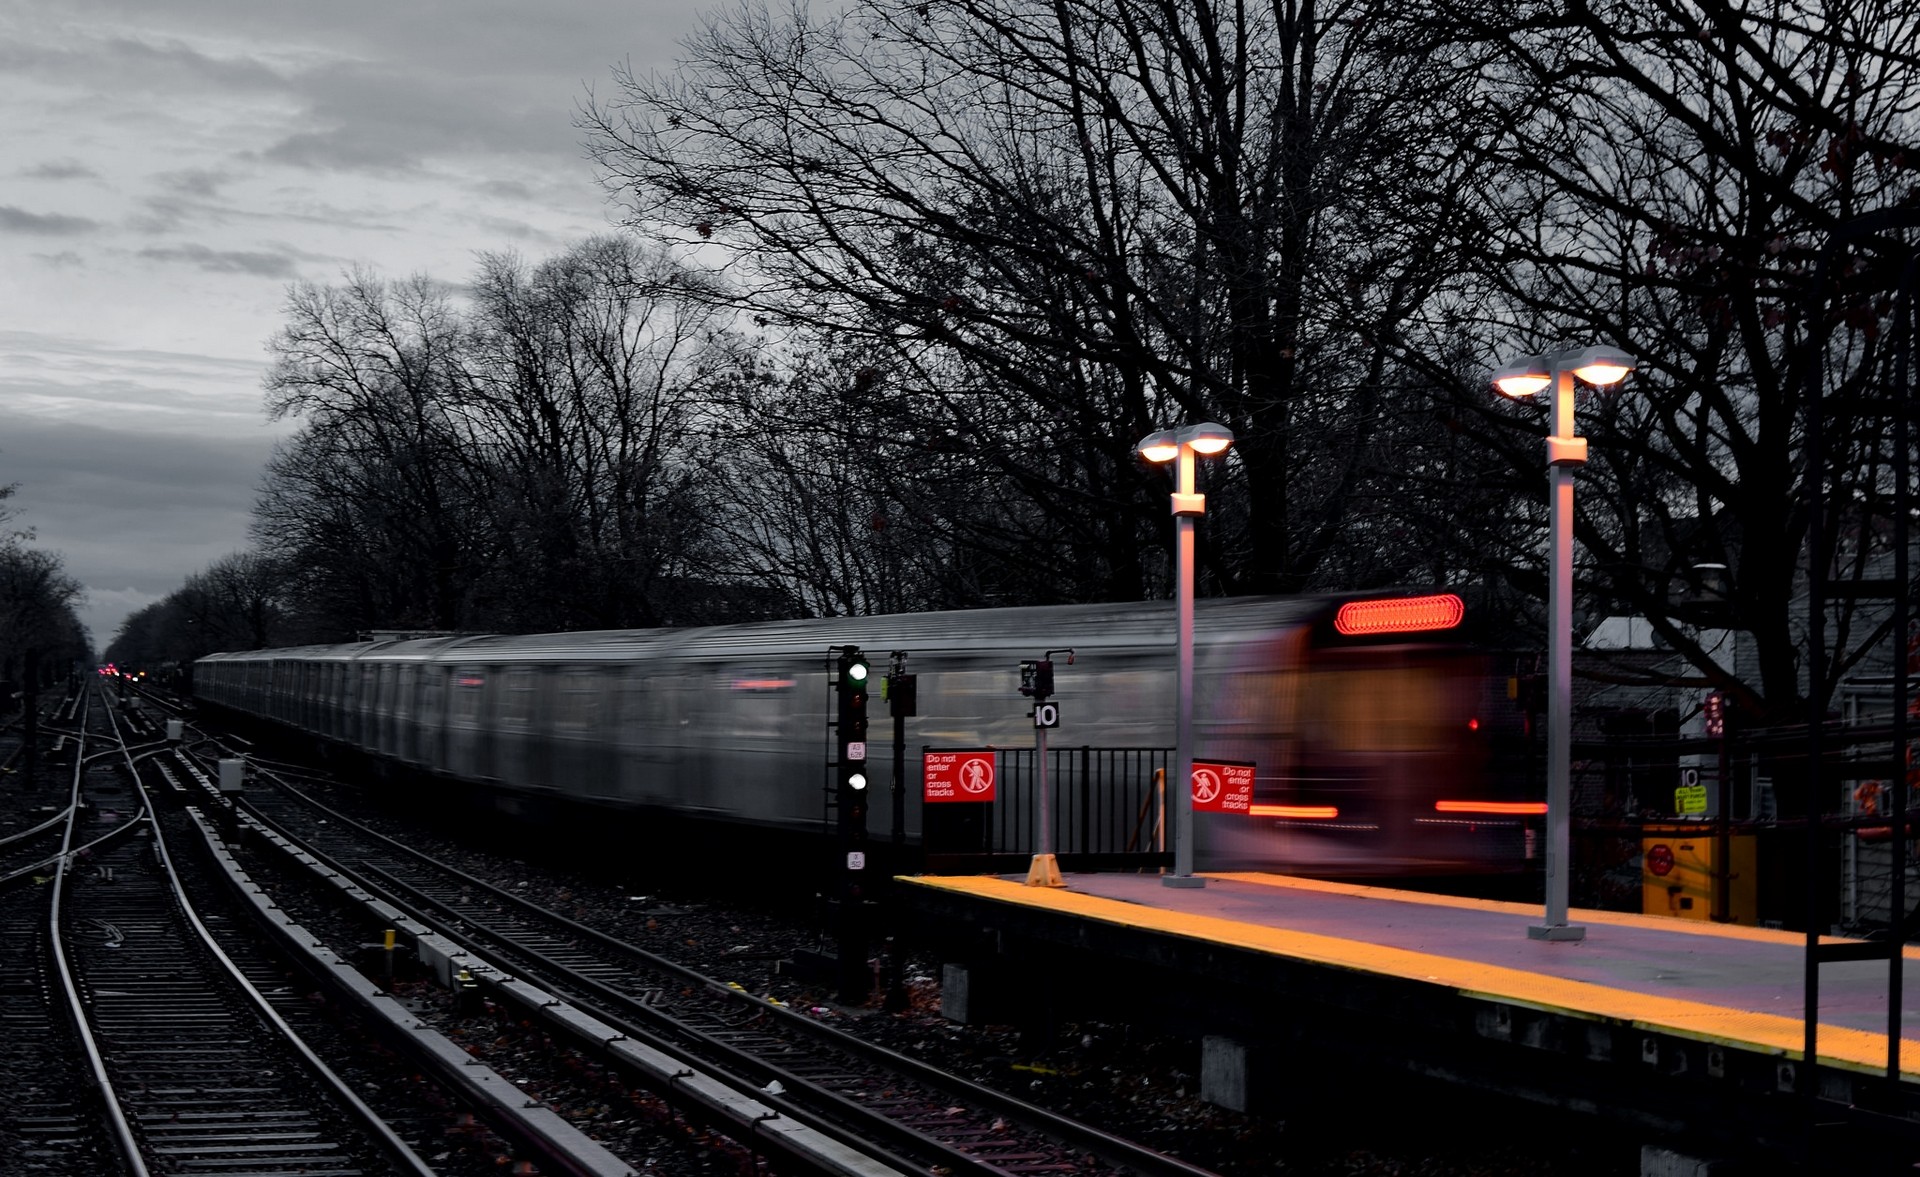 General 1920x1177 train light trails selective coloring motion blur railway gray outdoors